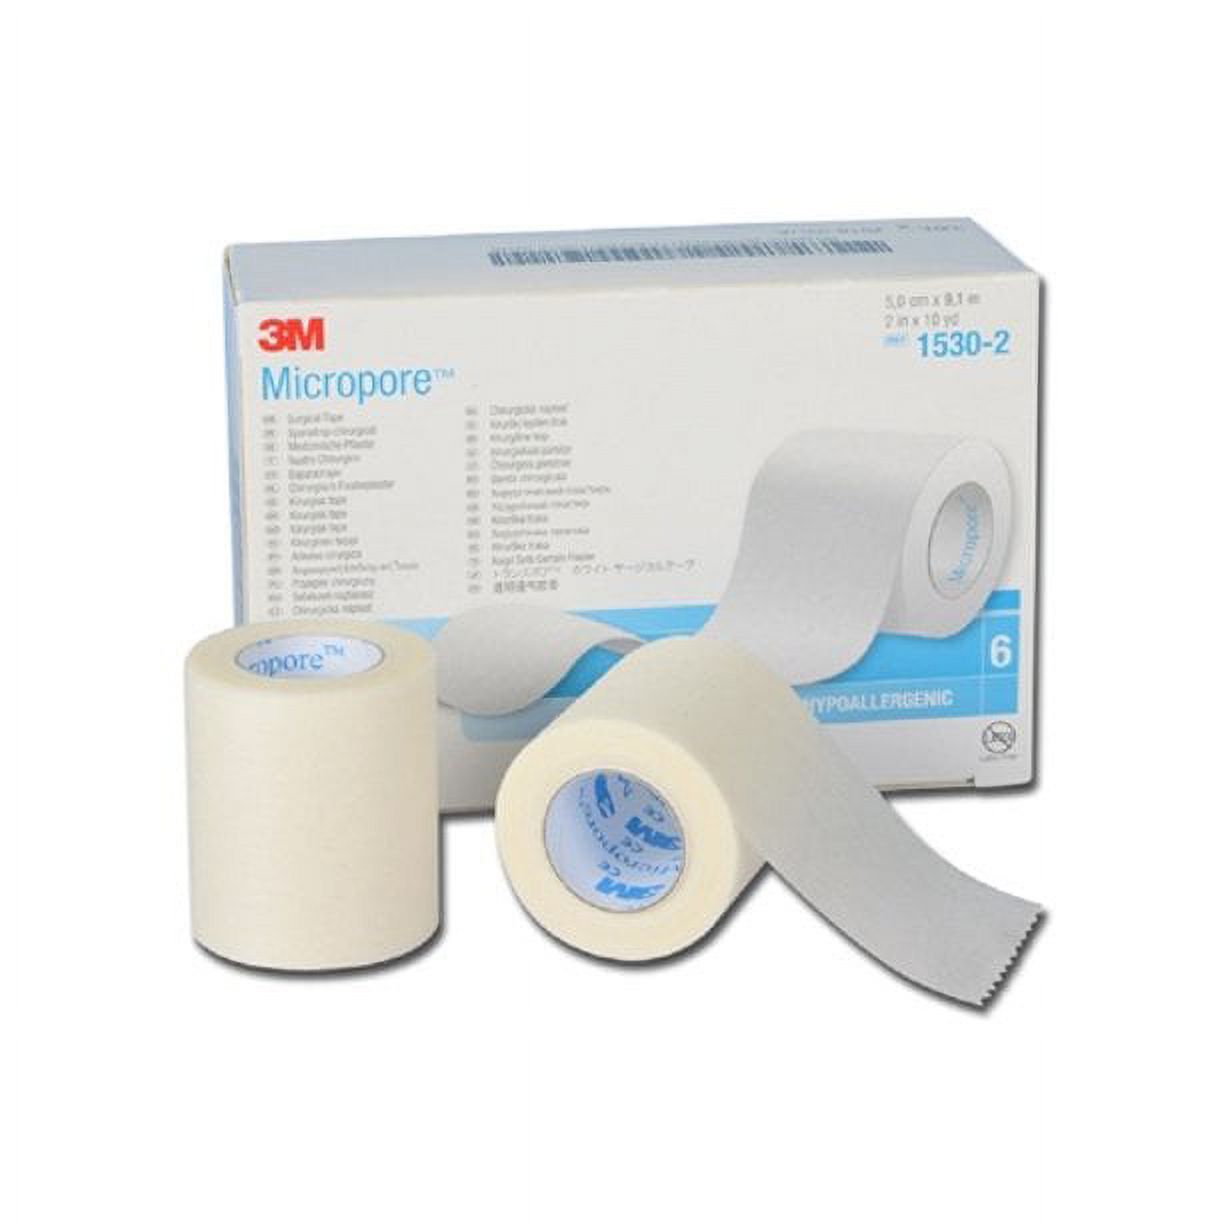 3M Micropore Skin Medical Tape 2 x 10 Yd | 6 Ct Paper Tape Medical | White  First Aid Tape | Surgical Micropore Tape | Adhesive Surgical Tape for